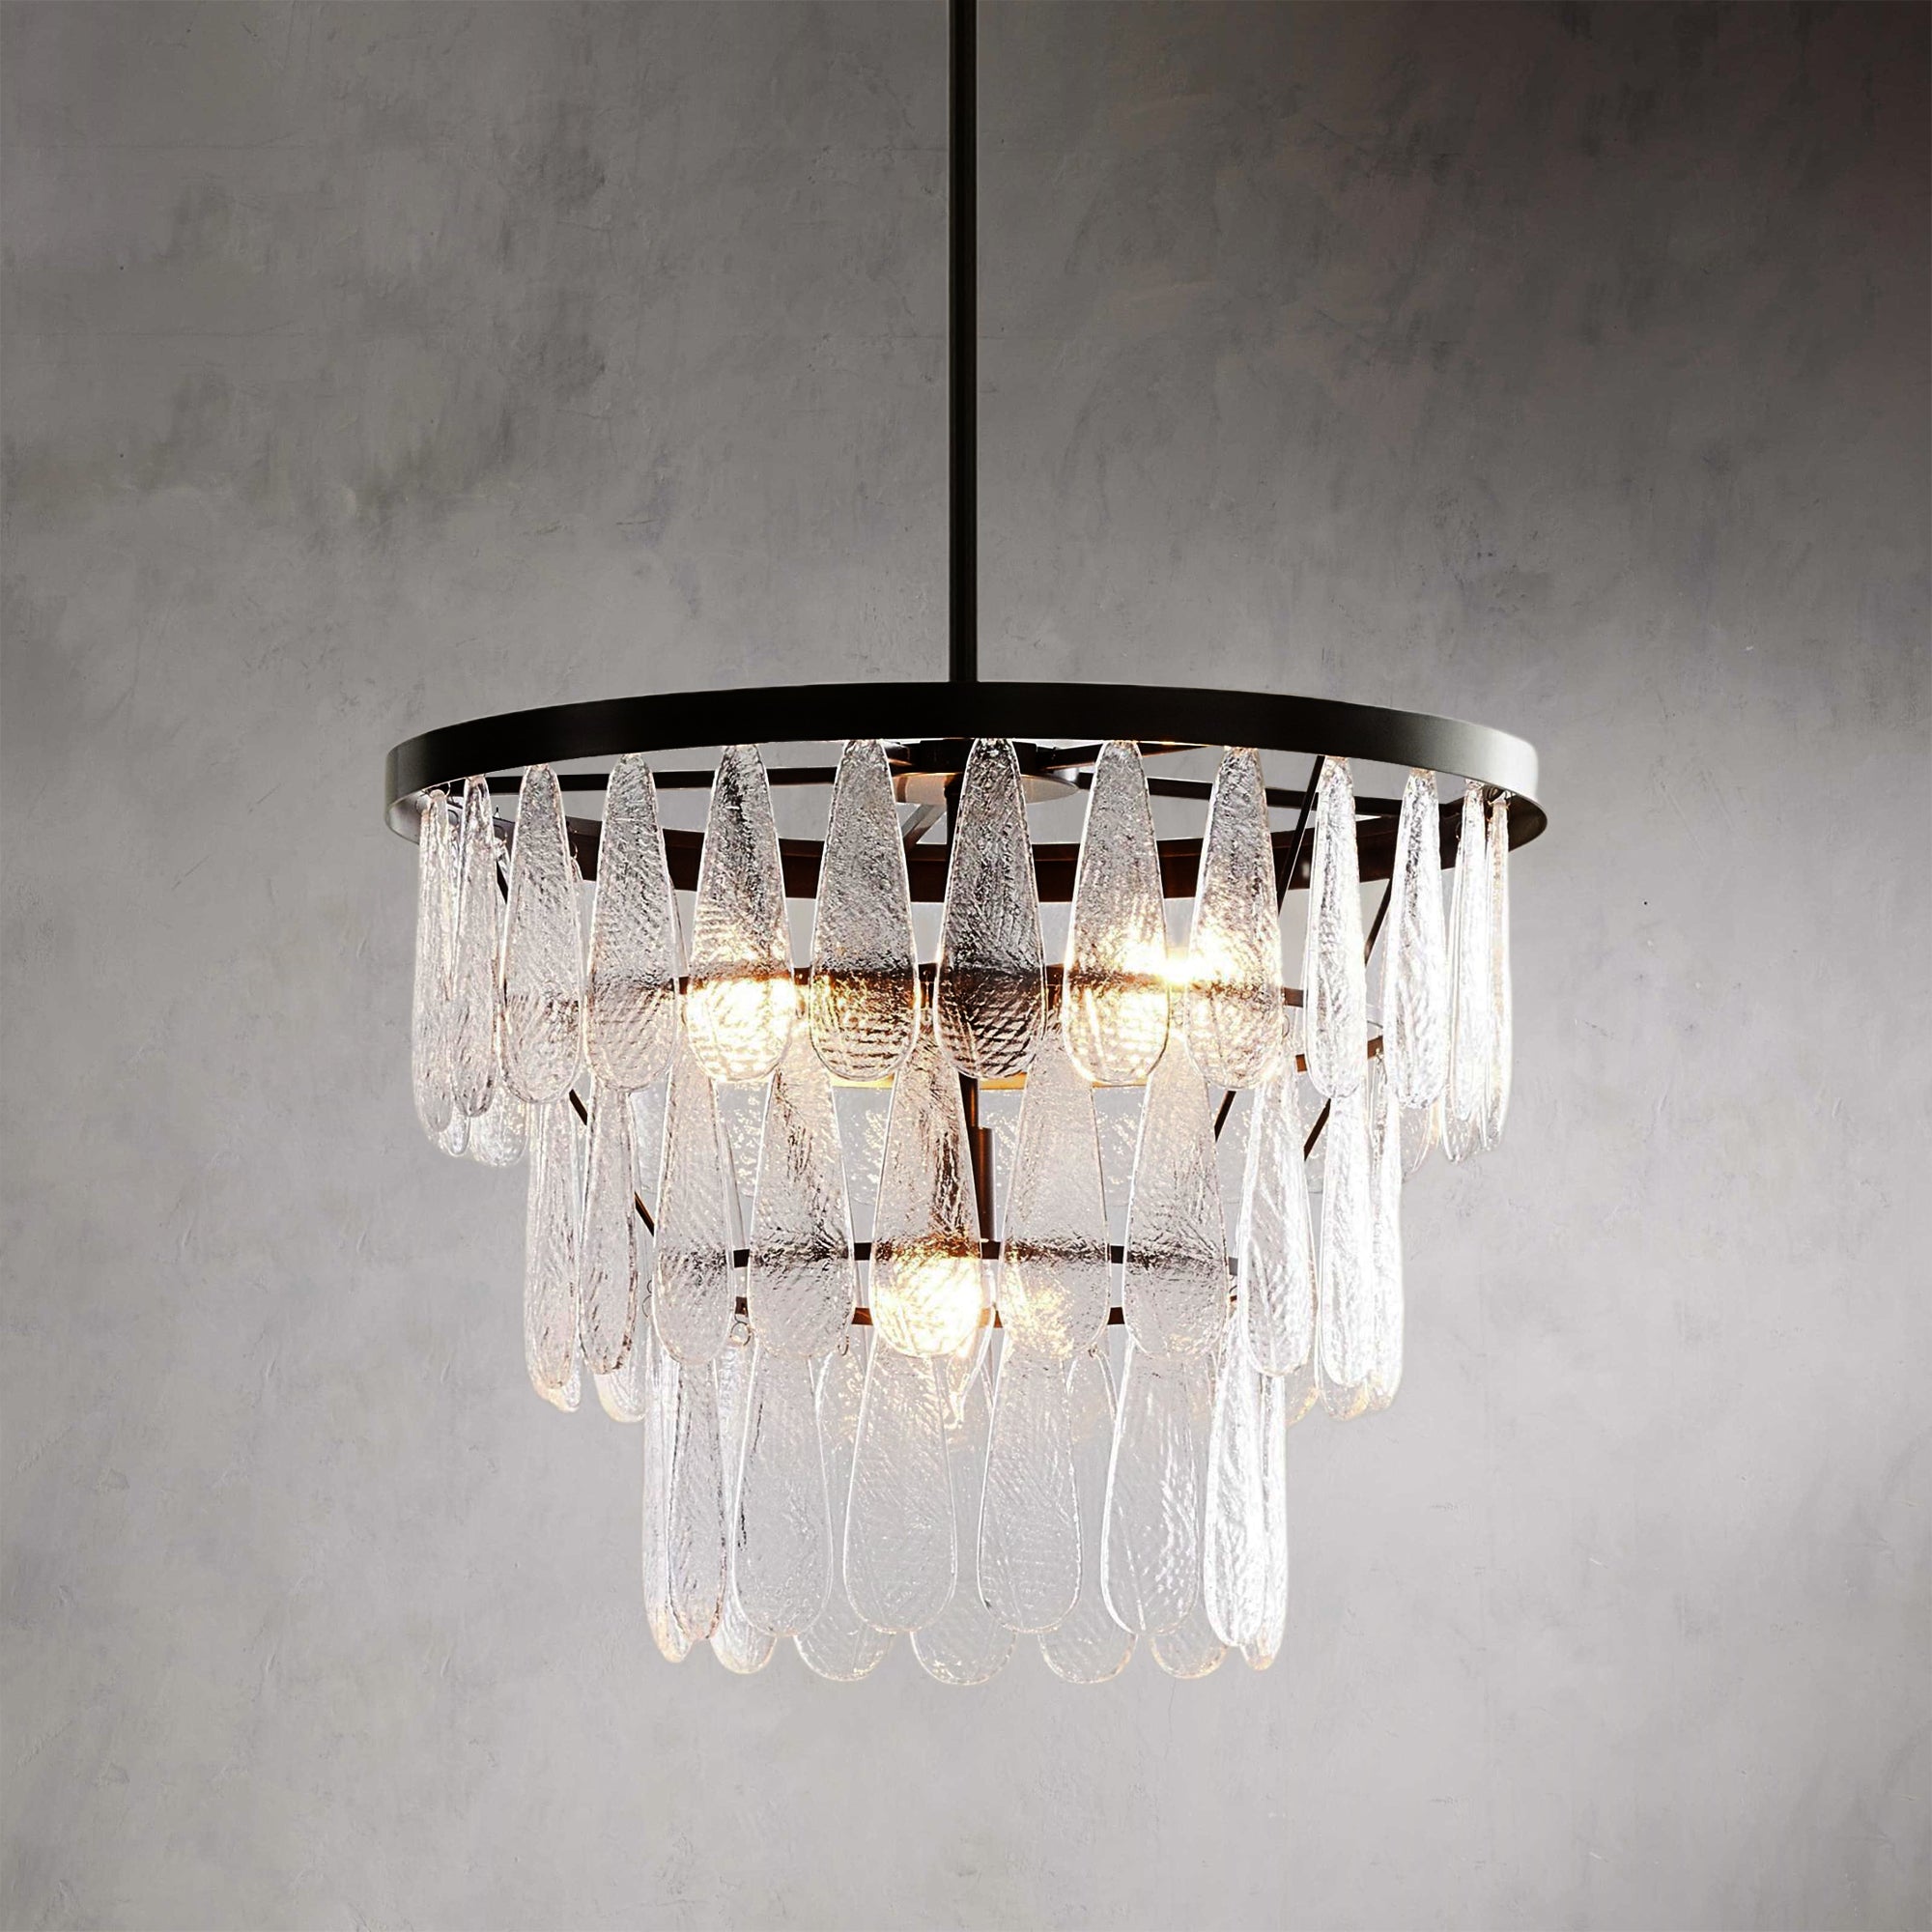 Vintage-Inspired Textured Glass Chandelier - Living Room Chandelier with Hand-Pressed Pattern and Rustic Design - Ideal Hanging Light Fixtures for Living Room and Modern Chandelier Options